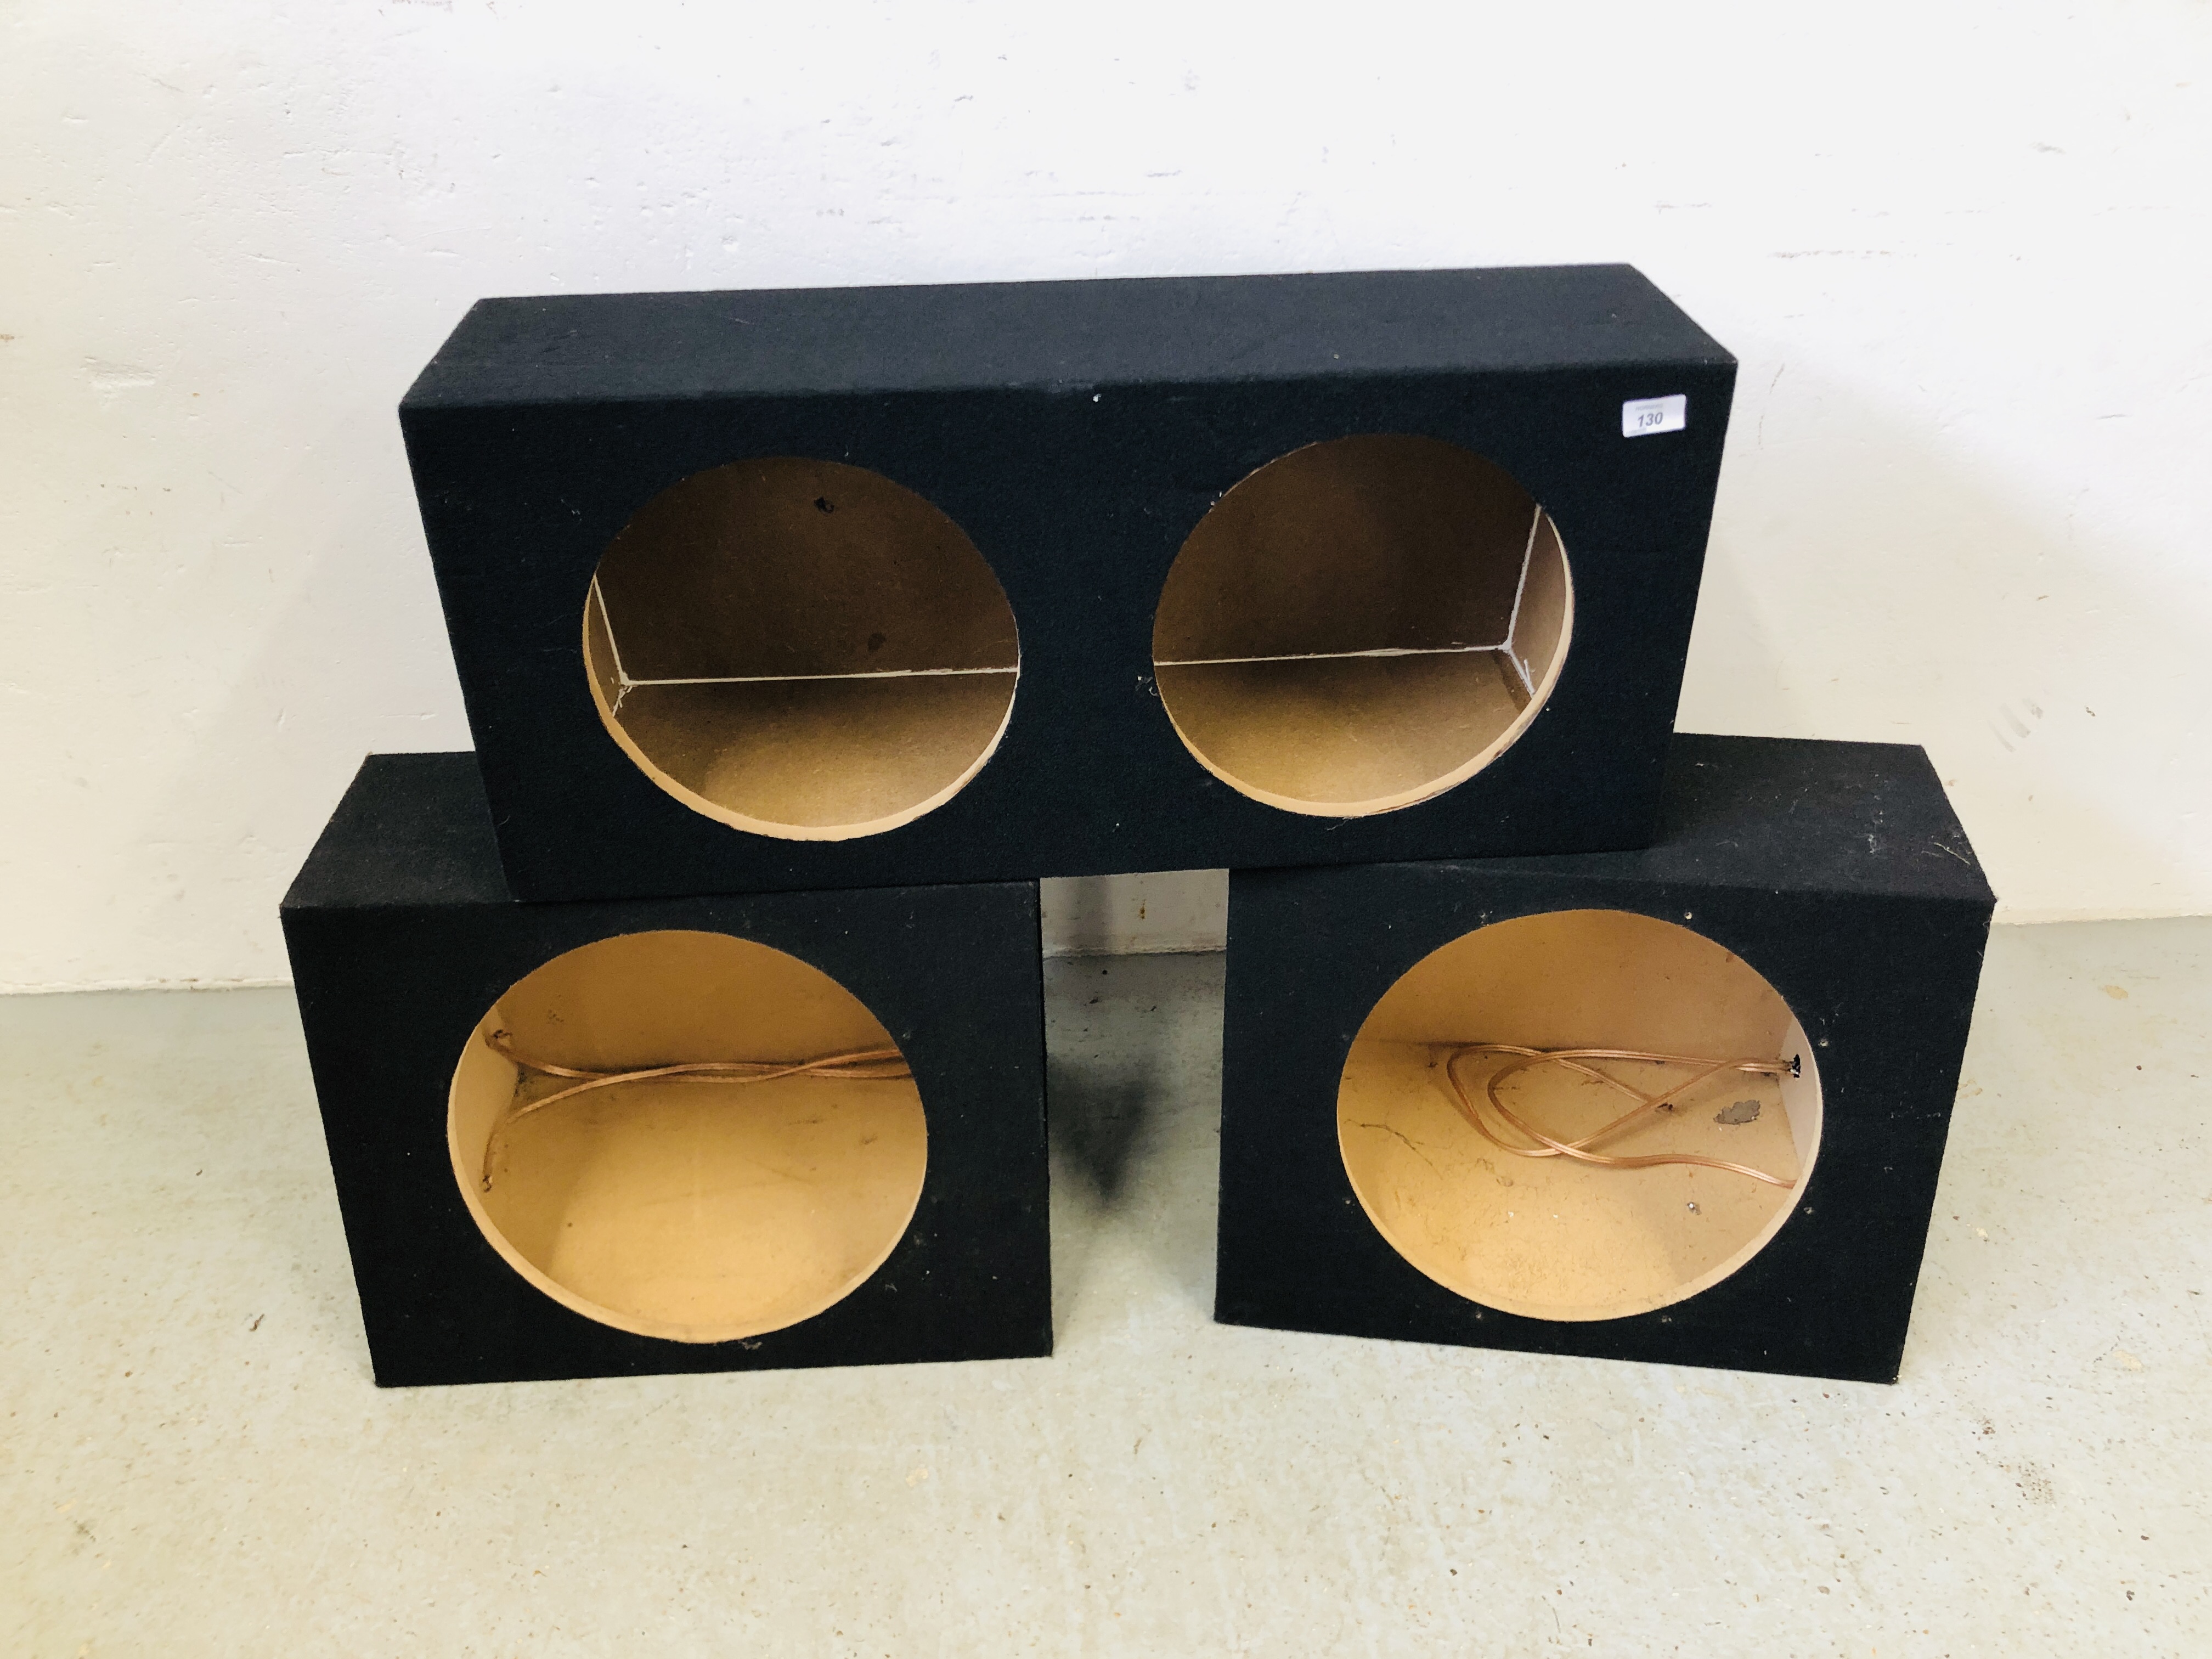 TWO SUBWOOFER SPEAKER SURROUNDS ALONG WITH DUEL SPEAKER WOODEN SURROUND - SOLD AS SEEN.